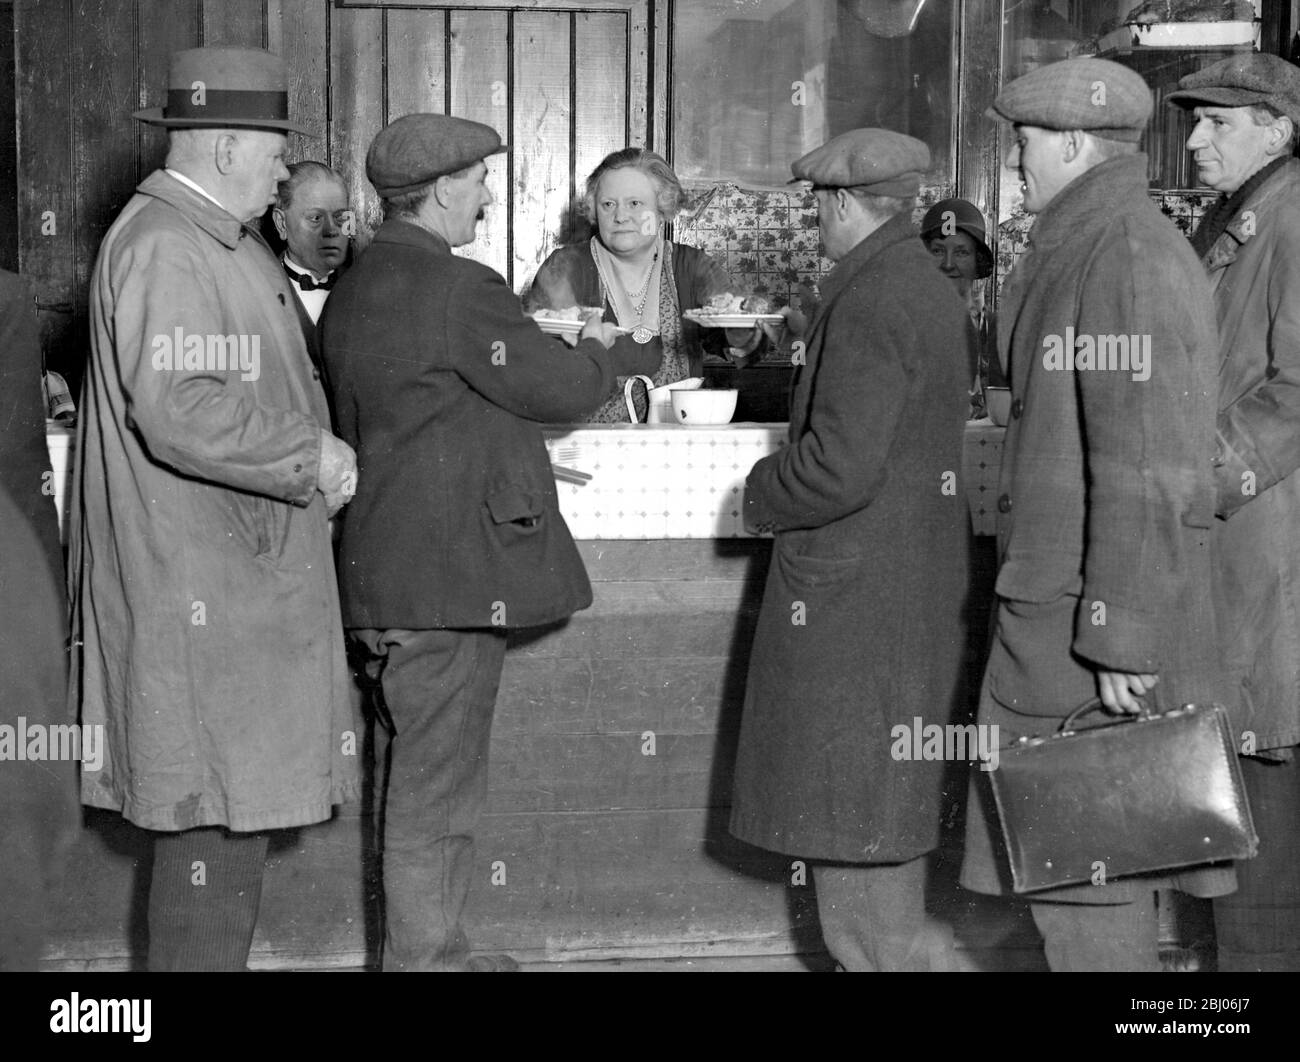 The welcome canteen, Webber Street, Waterloo Road. - Run by lady Clough Anson for unemployed. Lady Clough Anson is seen serving the men. - 21 November 1931 Stock Photo